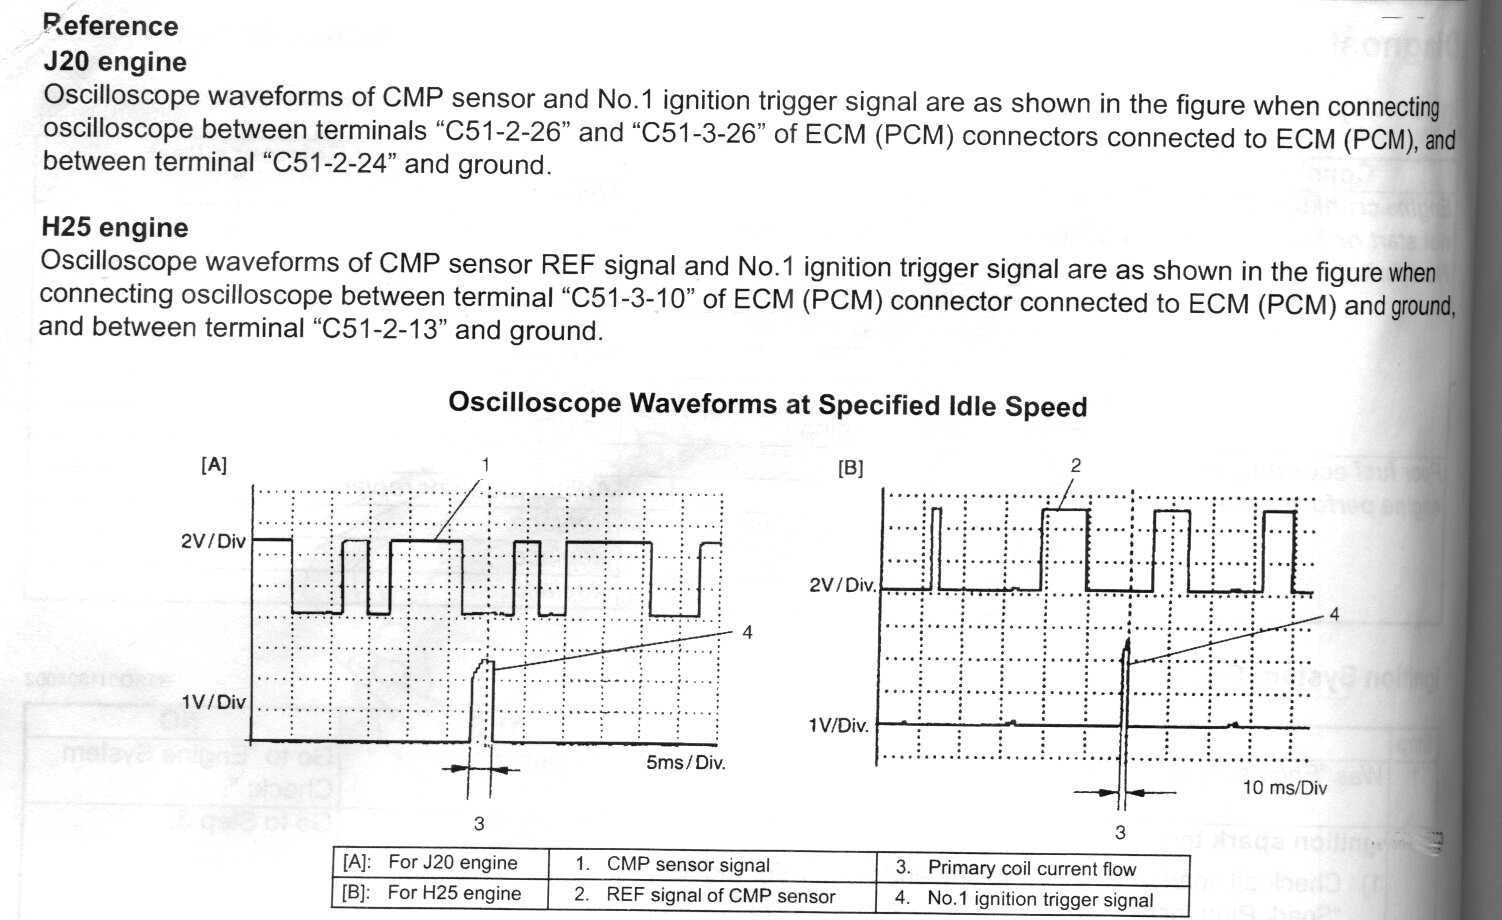 Oscilloscope waveforms at specified idle speed